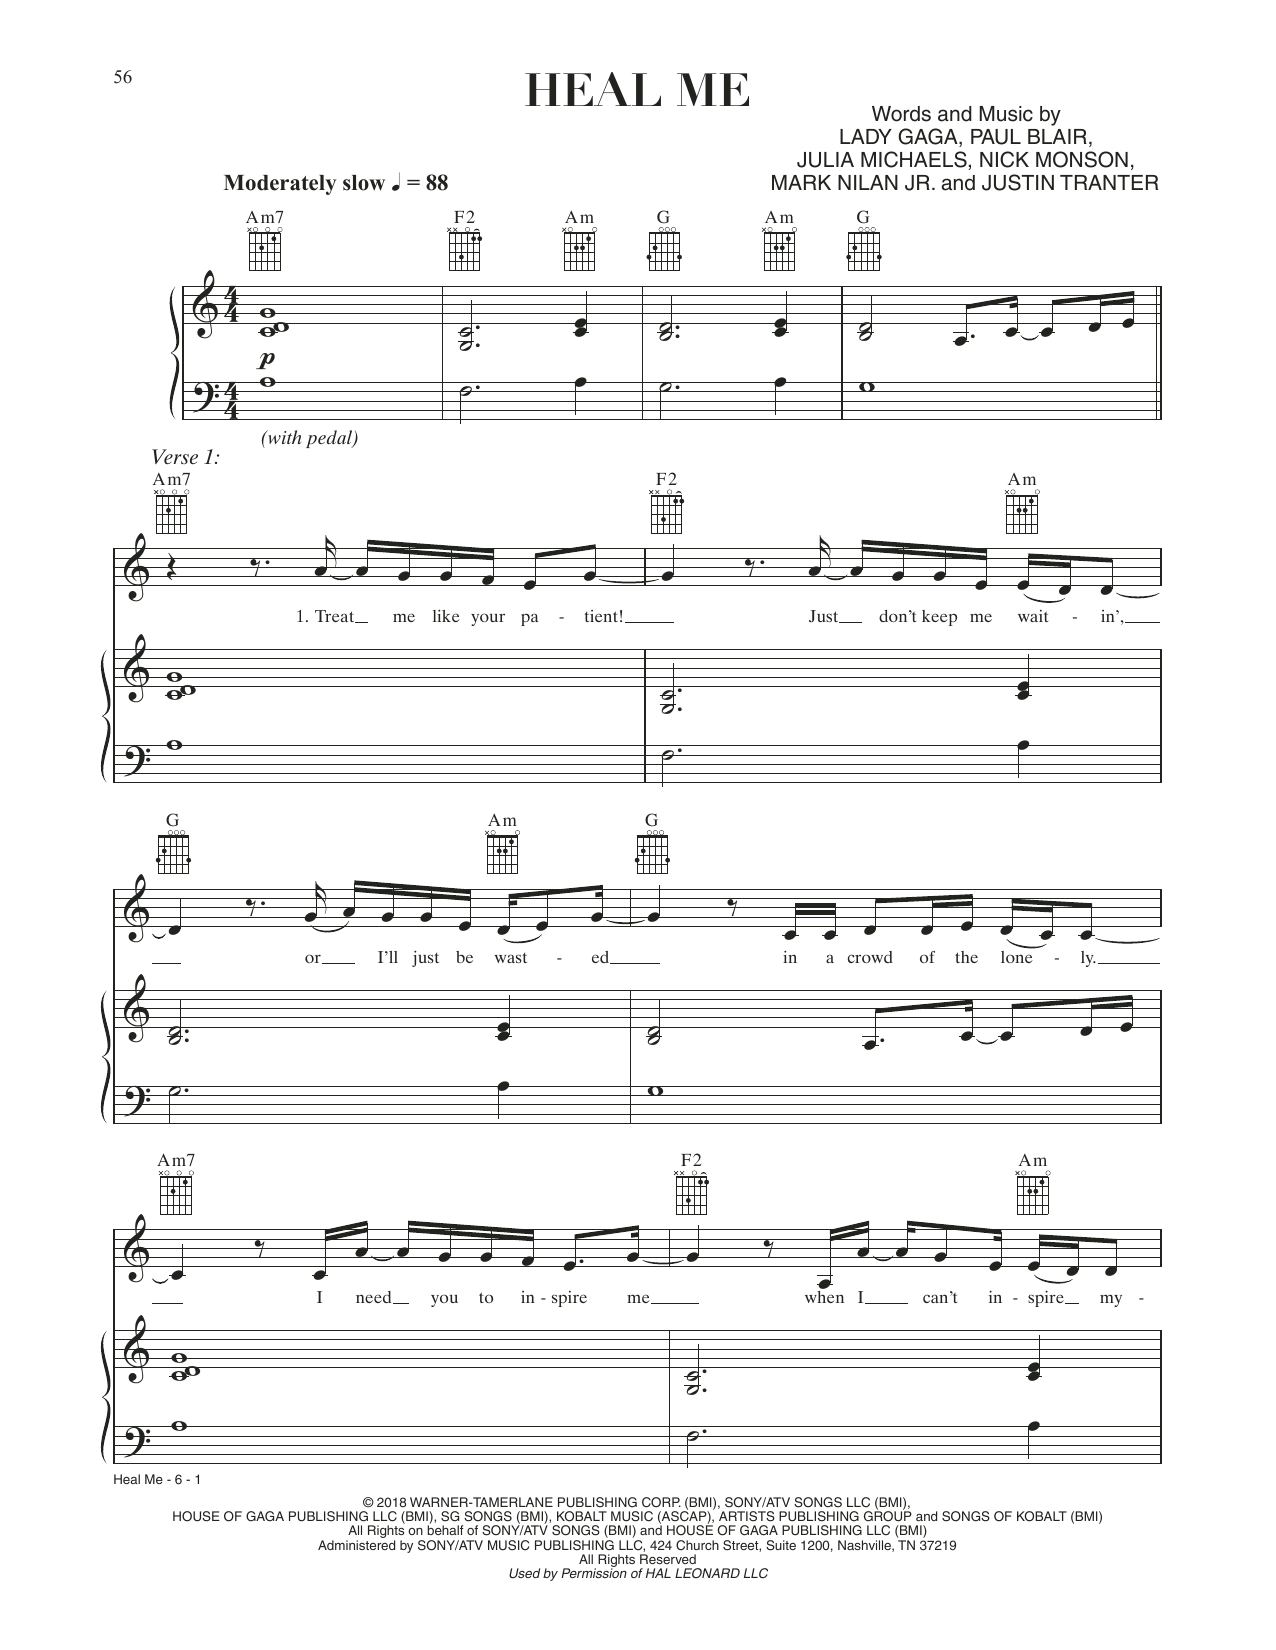 Download Lady Gaga Heal Me (from A Star Is Born) Sheet Music